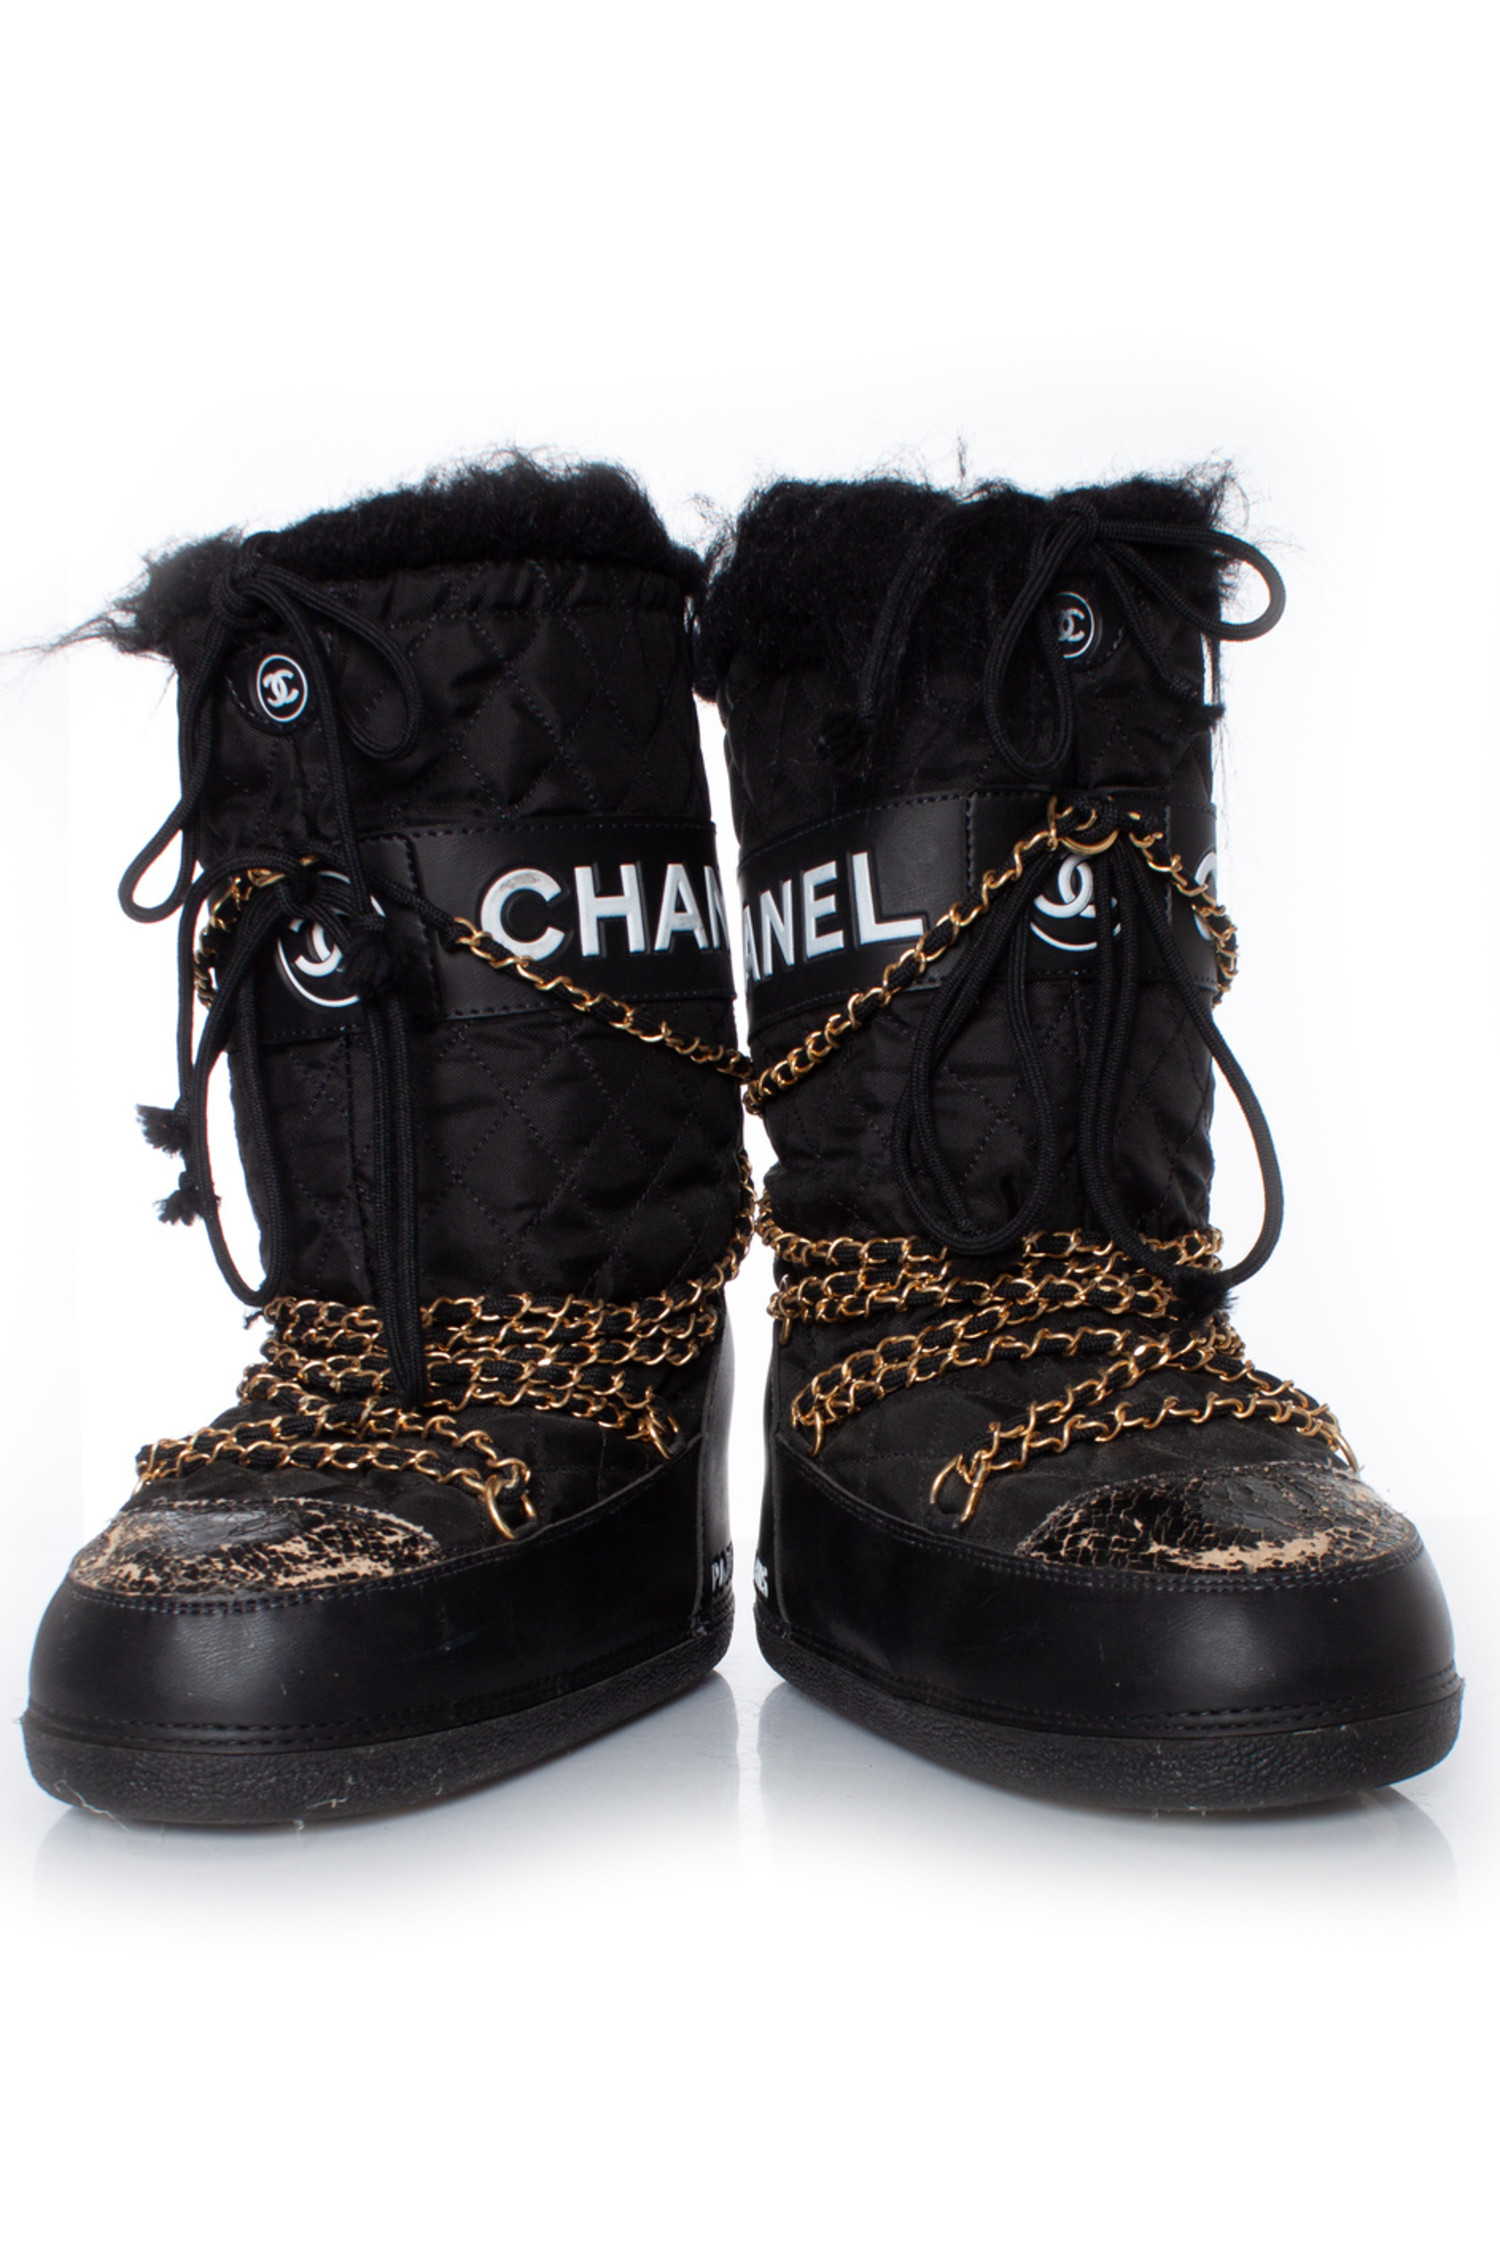 Chanel, Moon boots with gold chain - Unique Designer Pieces